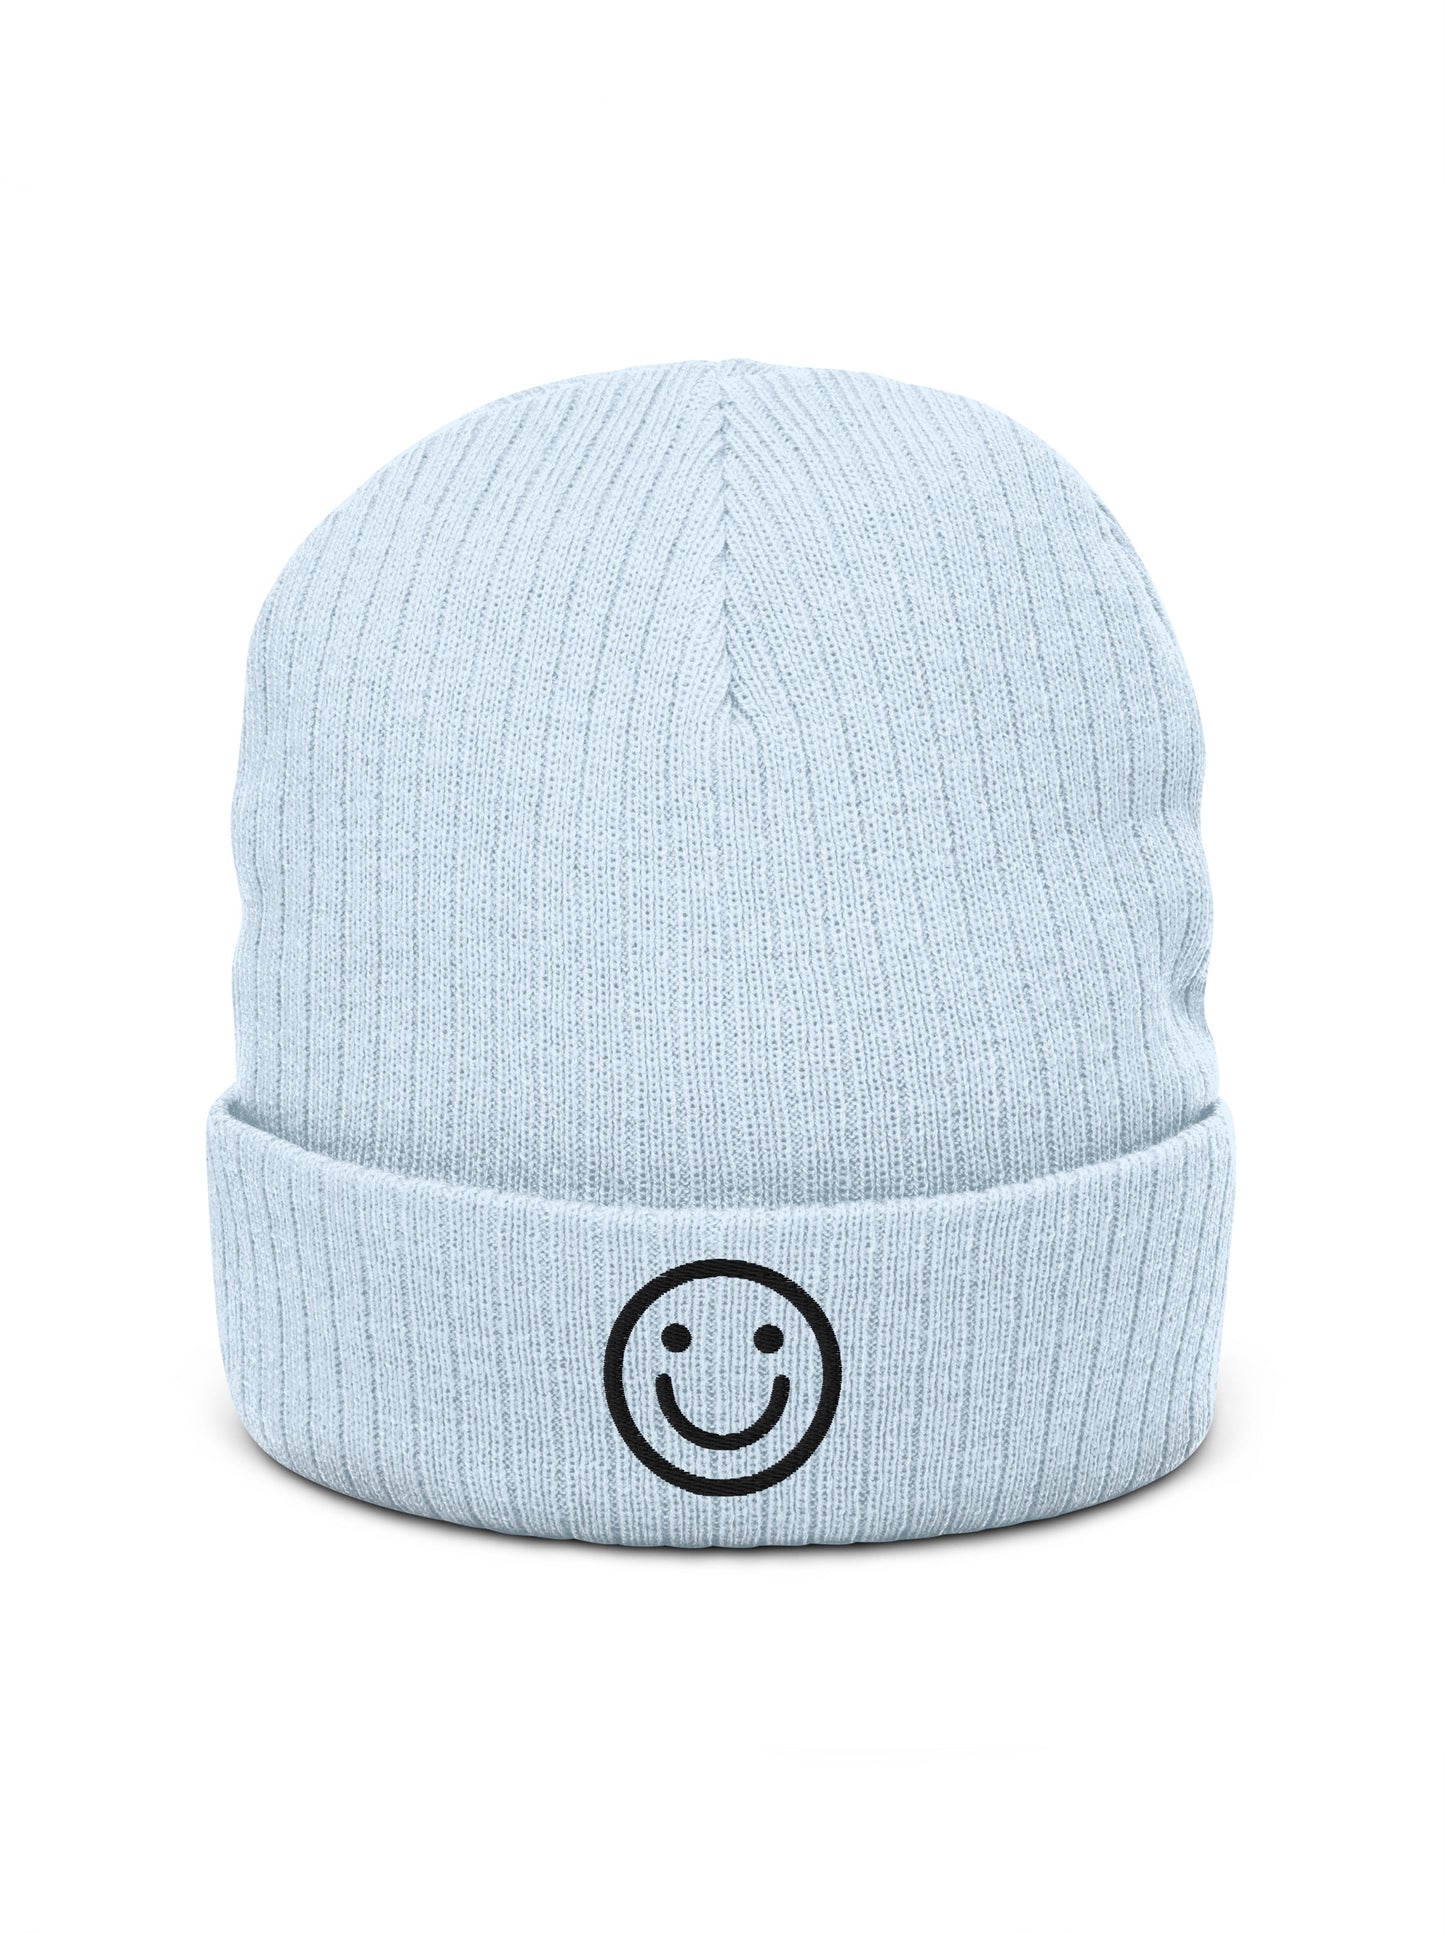 Amii Angel Classic Collection : Colorful Beanies (Ecological)